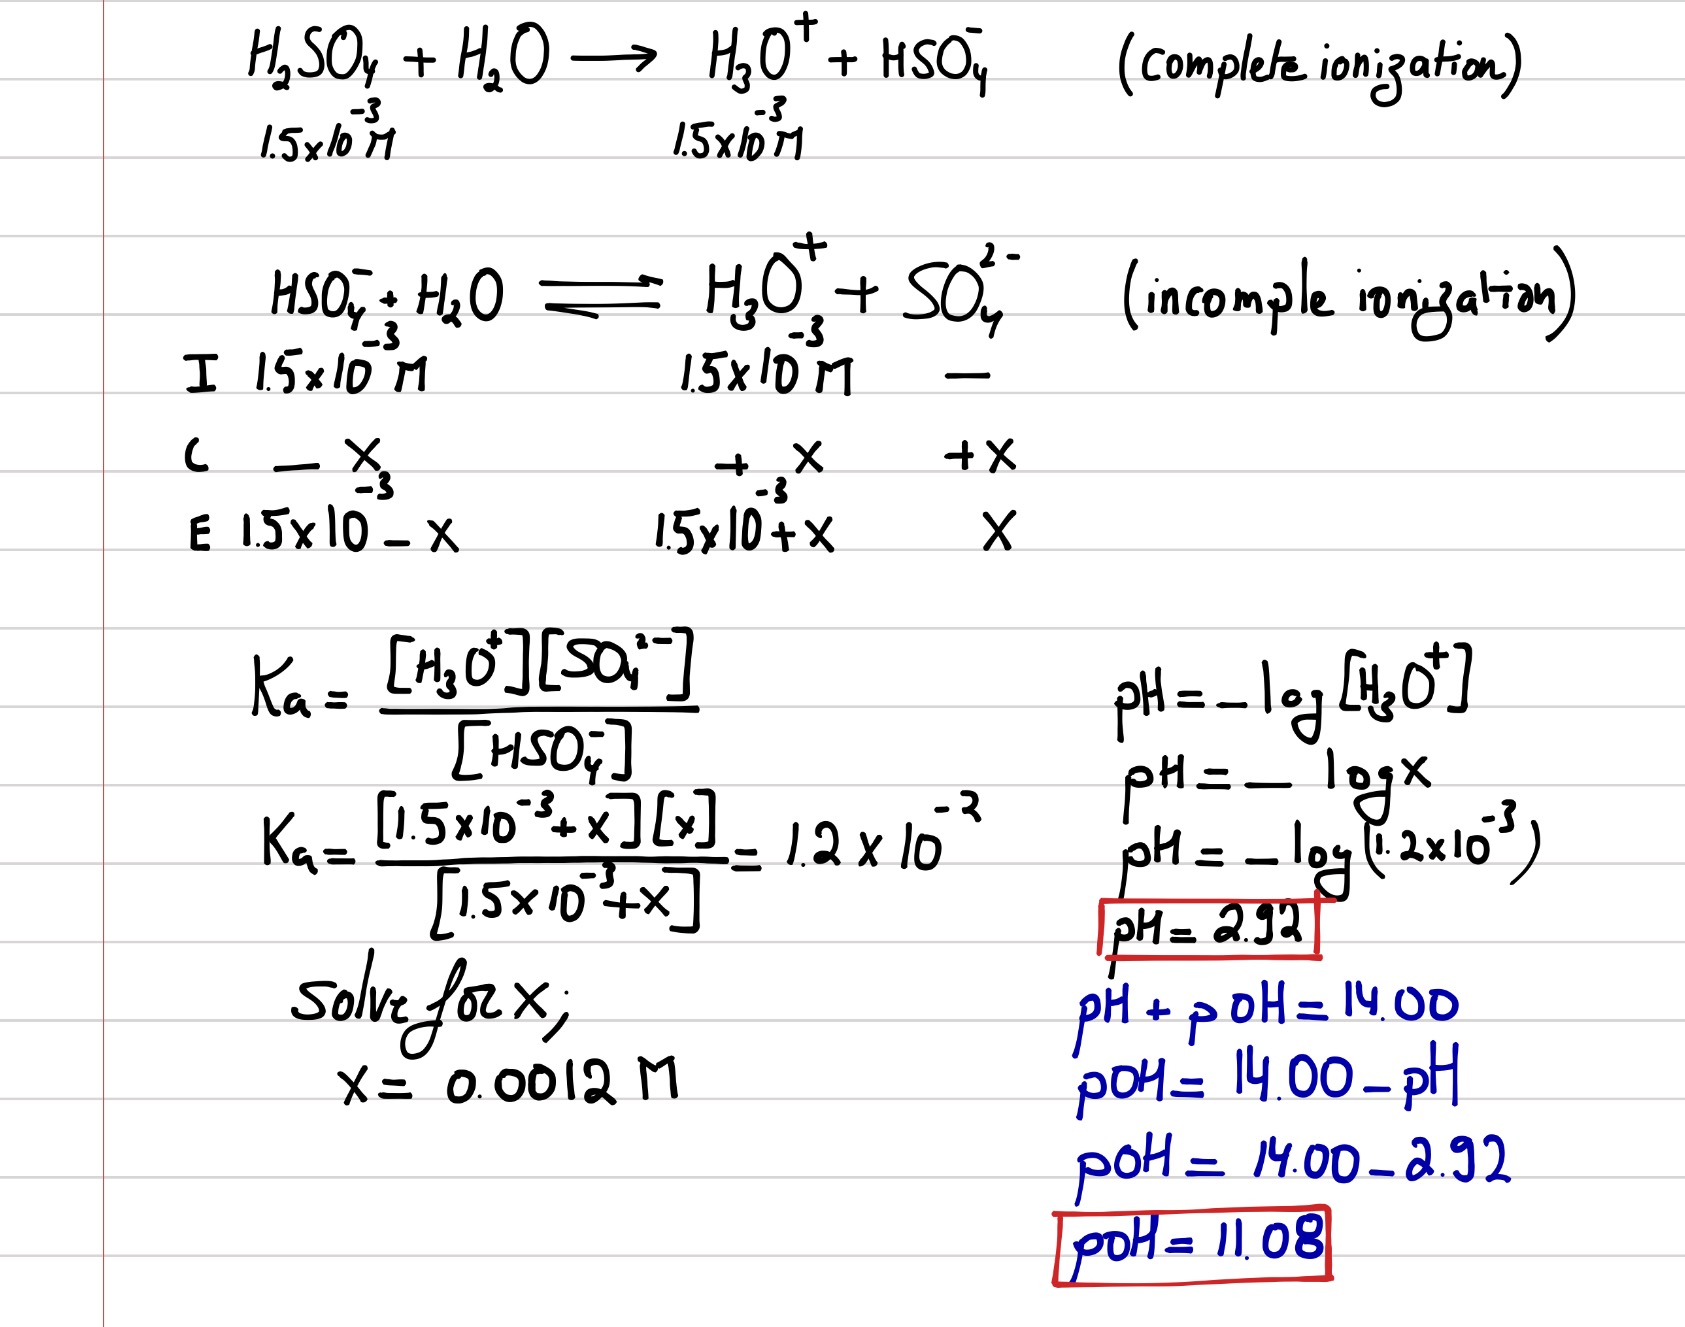 What Is The Ph And Poh Of A 1 5 10 3 M Solution Of Sulfuric Acid H 2so 4 Socratic